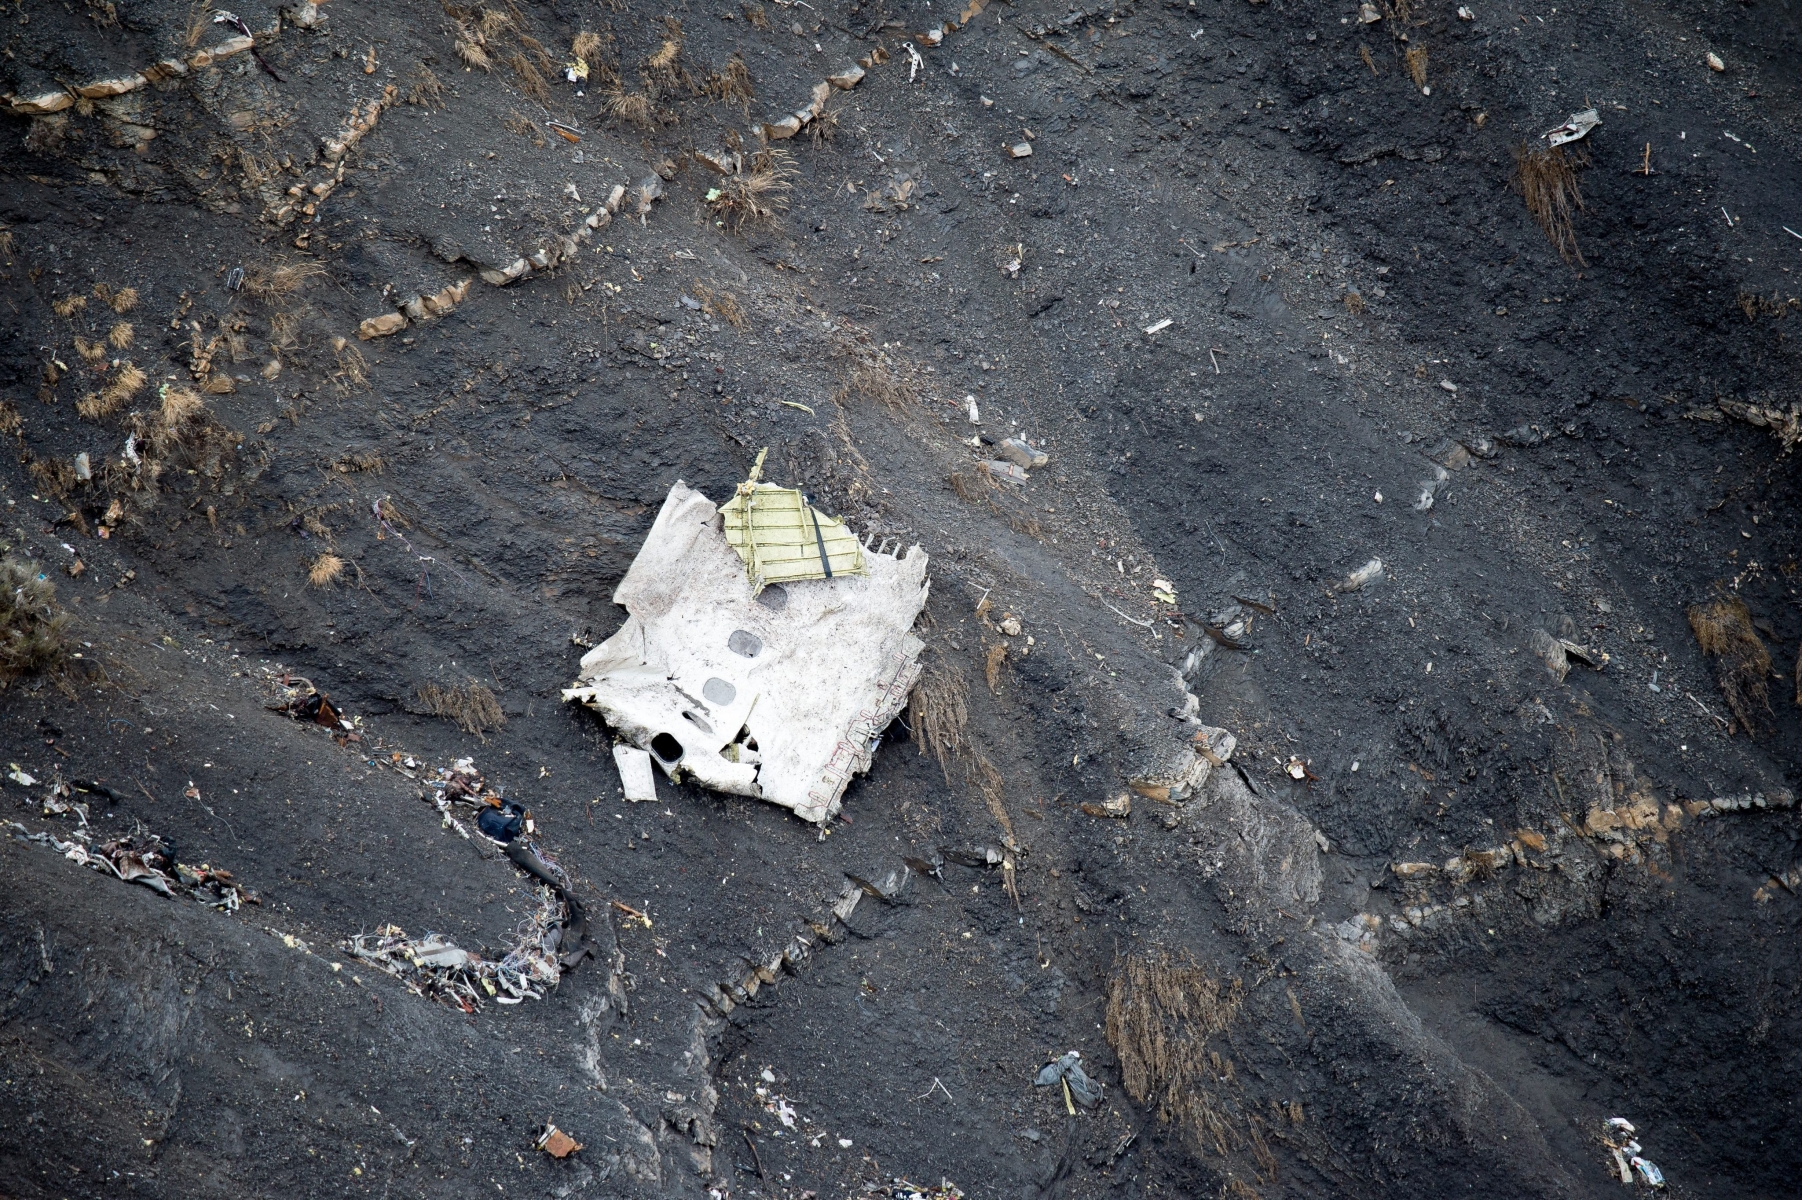 epa04678320 A handout photo provided by the French Interior Ministry on 25 March 2015 shows bit of the wreckage and debris on the mountain slopes after the crash of the Germanwings Airbus A320 over the French Alps, France, 25 March 2015. Search crews resumed helicopter flights around dawn on 25 March 2015 to the remote mountainside in southern France where Germanwings Flight 4U 9525 from Barcelona to Duesseldorf crashed after a rapid descent, likely killing all 150 people aboard on 24 March.  EPA/F. BALSAMO / SIRPA GENDARMERIE / MINISTERE DE L'INTERIEUR  HANDOUT EDITORIAL USE ONLY/NO SALES FRANCE PLANE CRASH